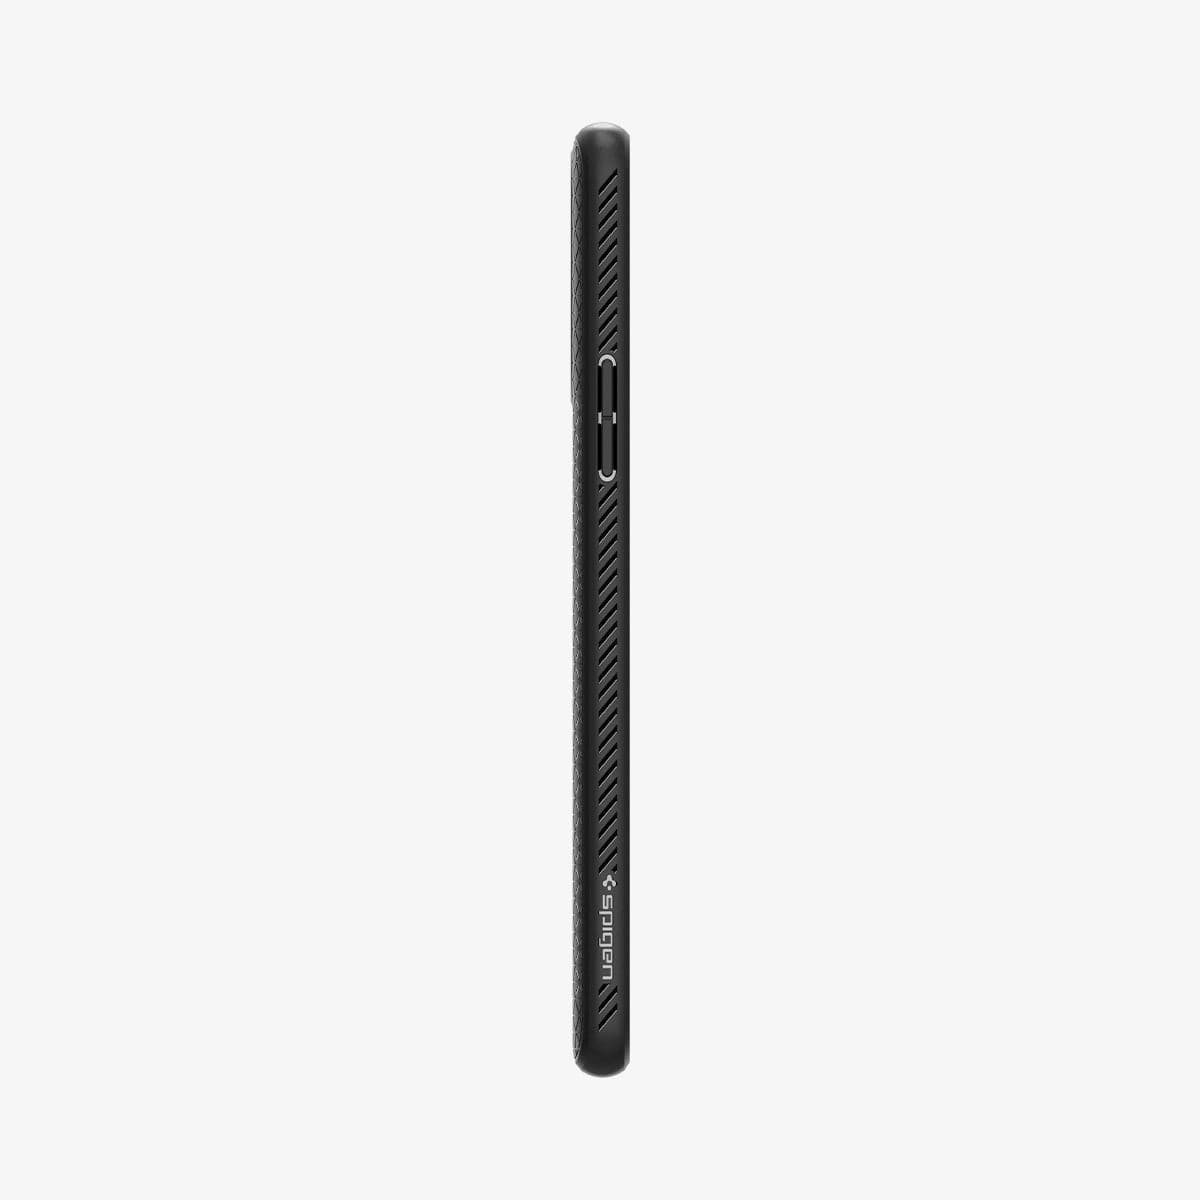 ACS02764 - OnePlus 9R Liquid Air Case in Matte Black showing the side